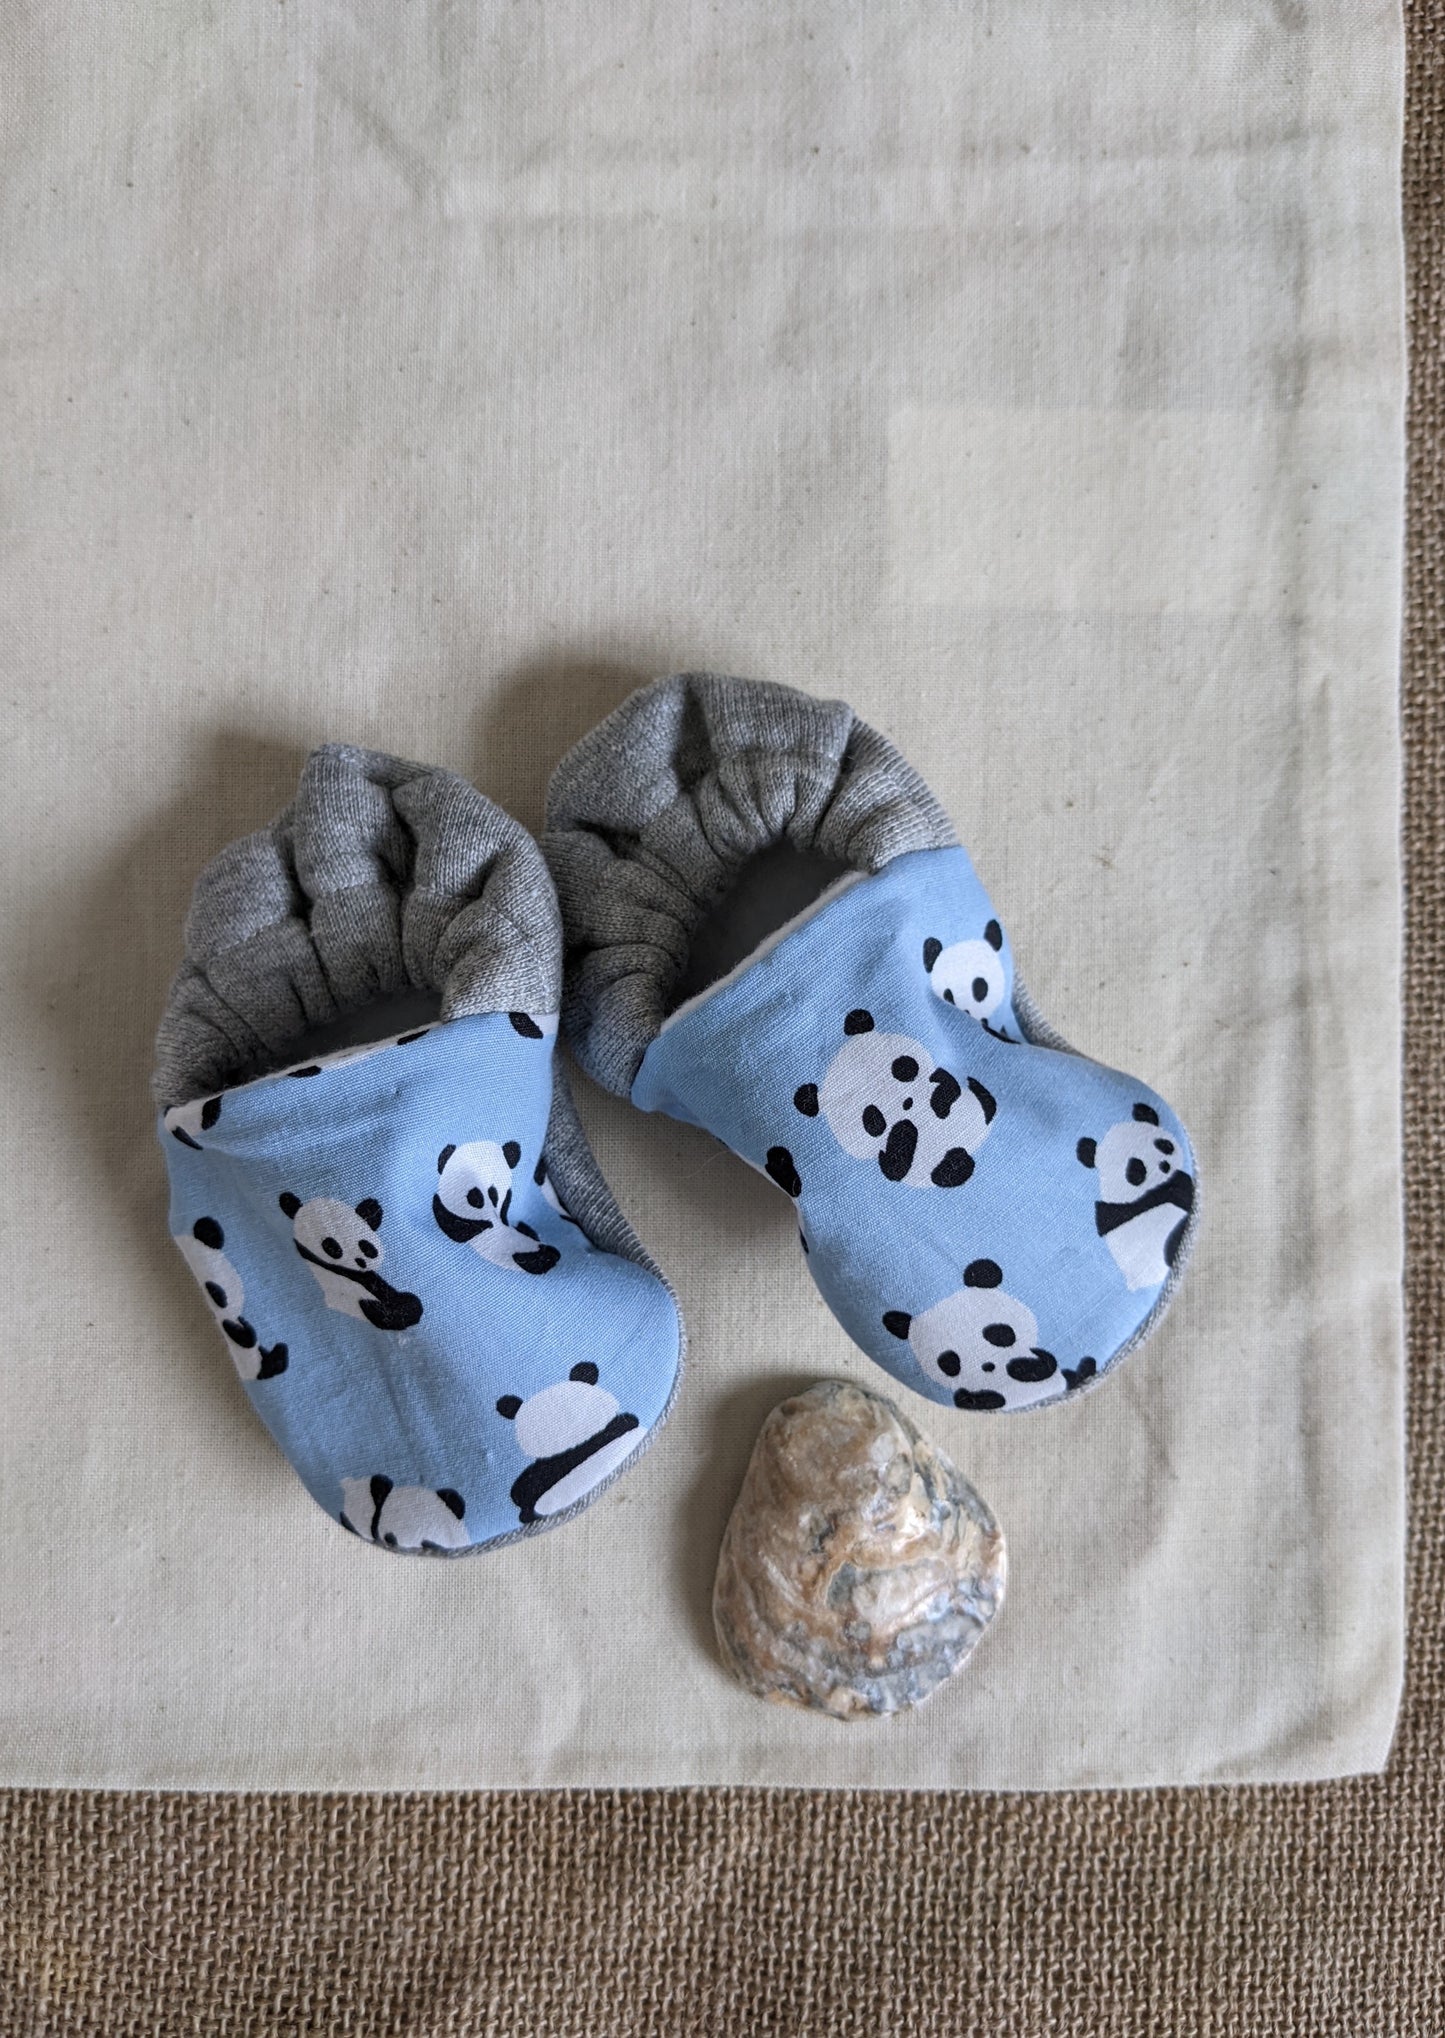 Baby Gift Bag - Handmade dress, slippers and wall hanging